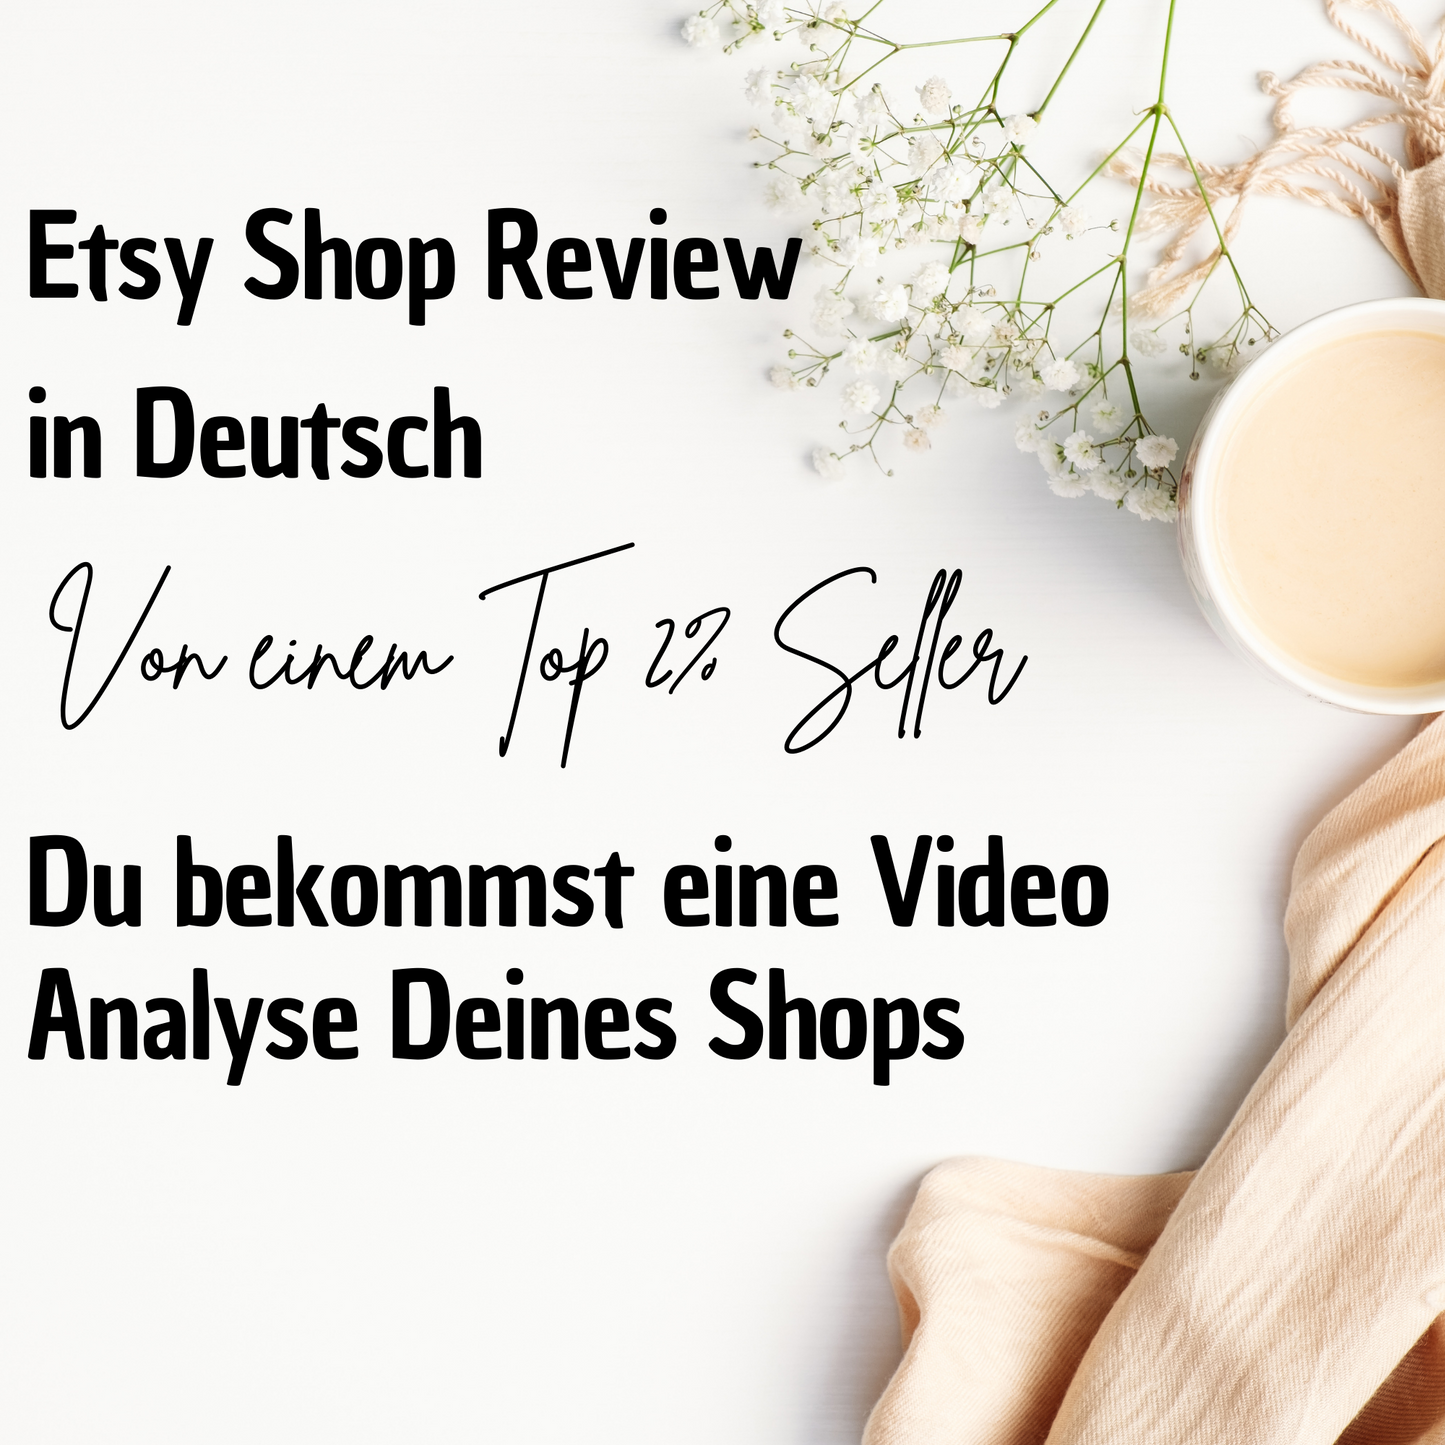 Etsy Shop Review - Video Analyse